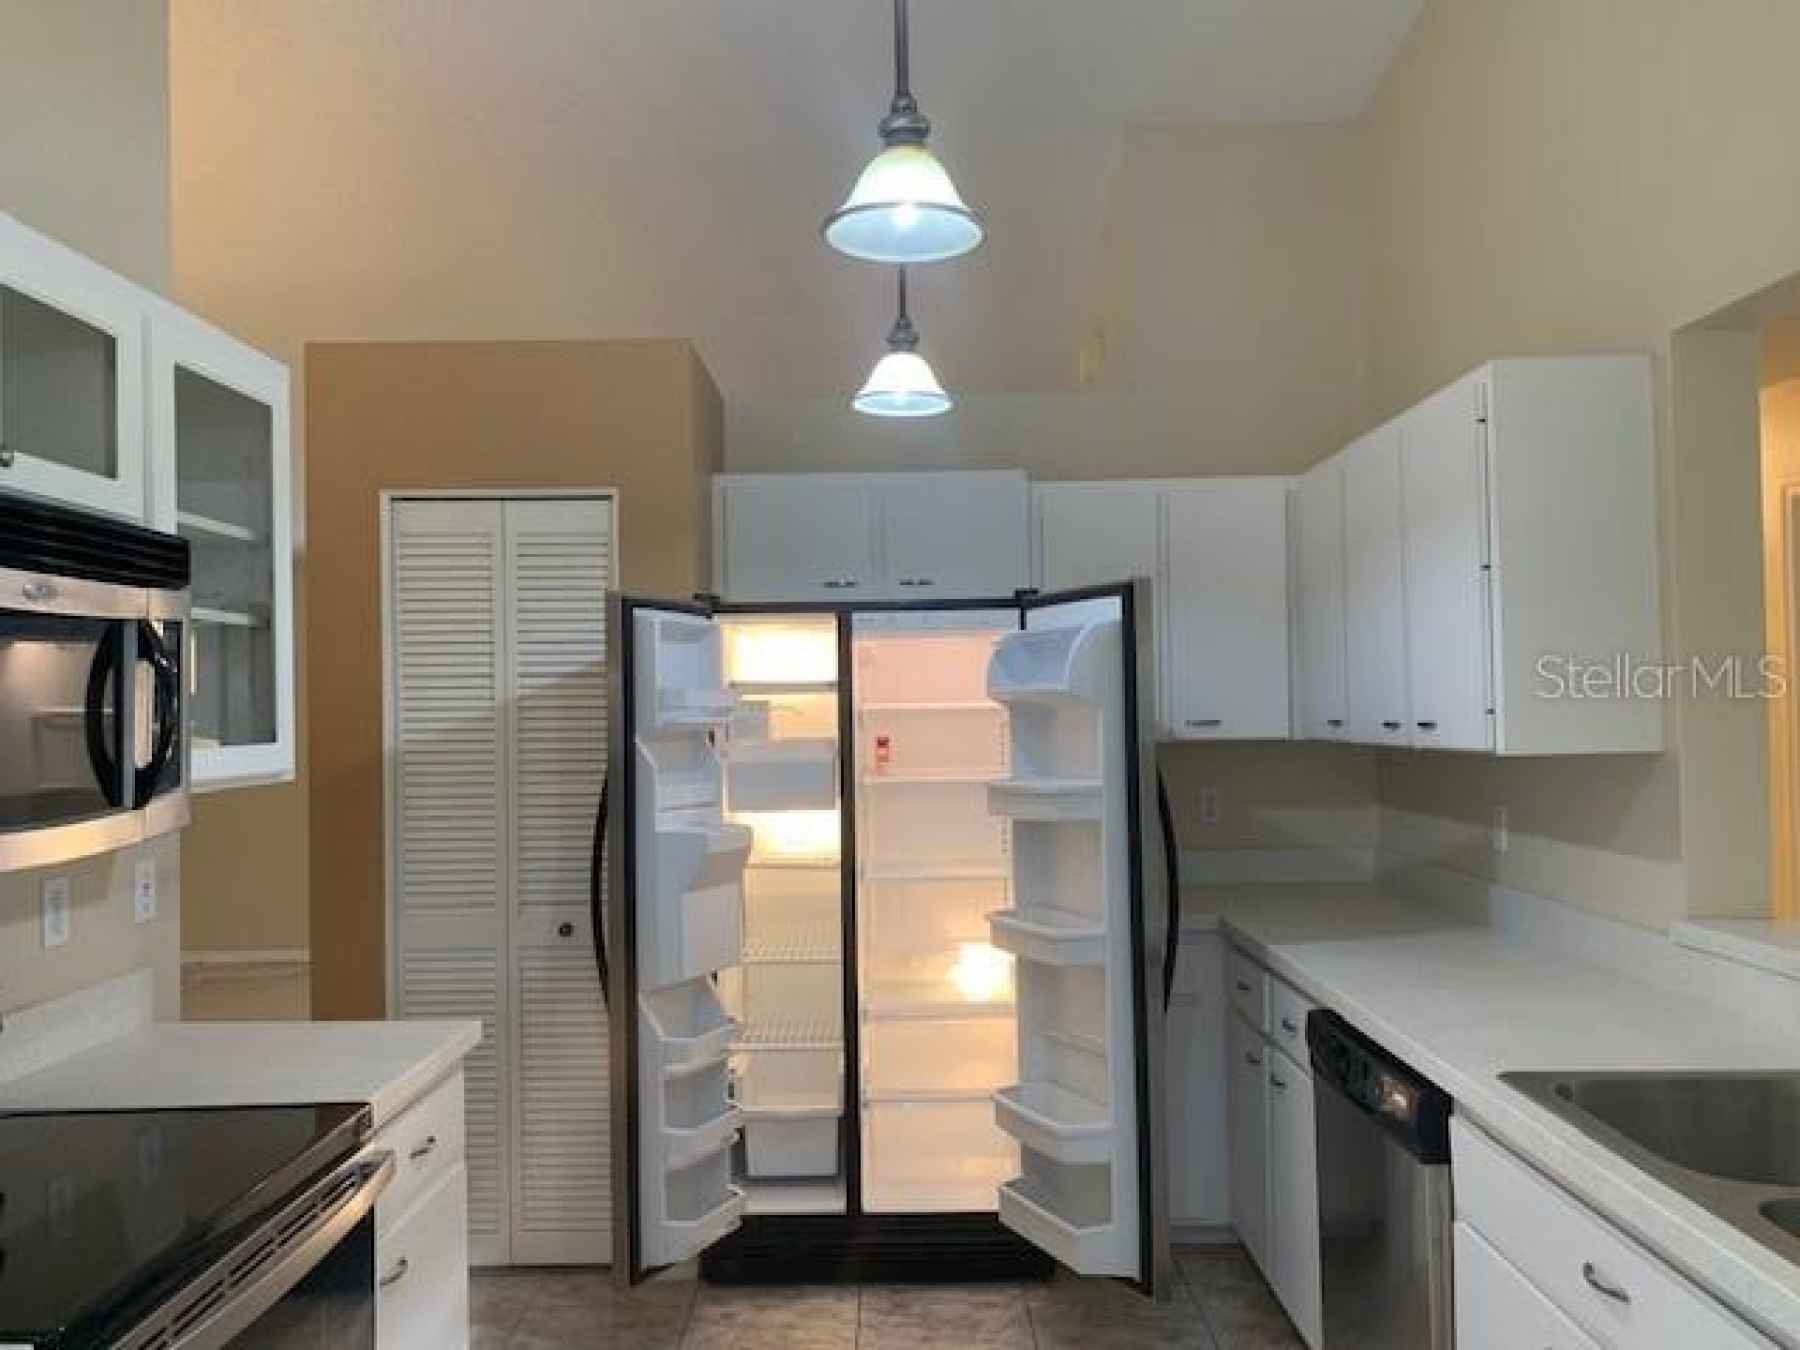 Nice sized stainless steel refrigerater